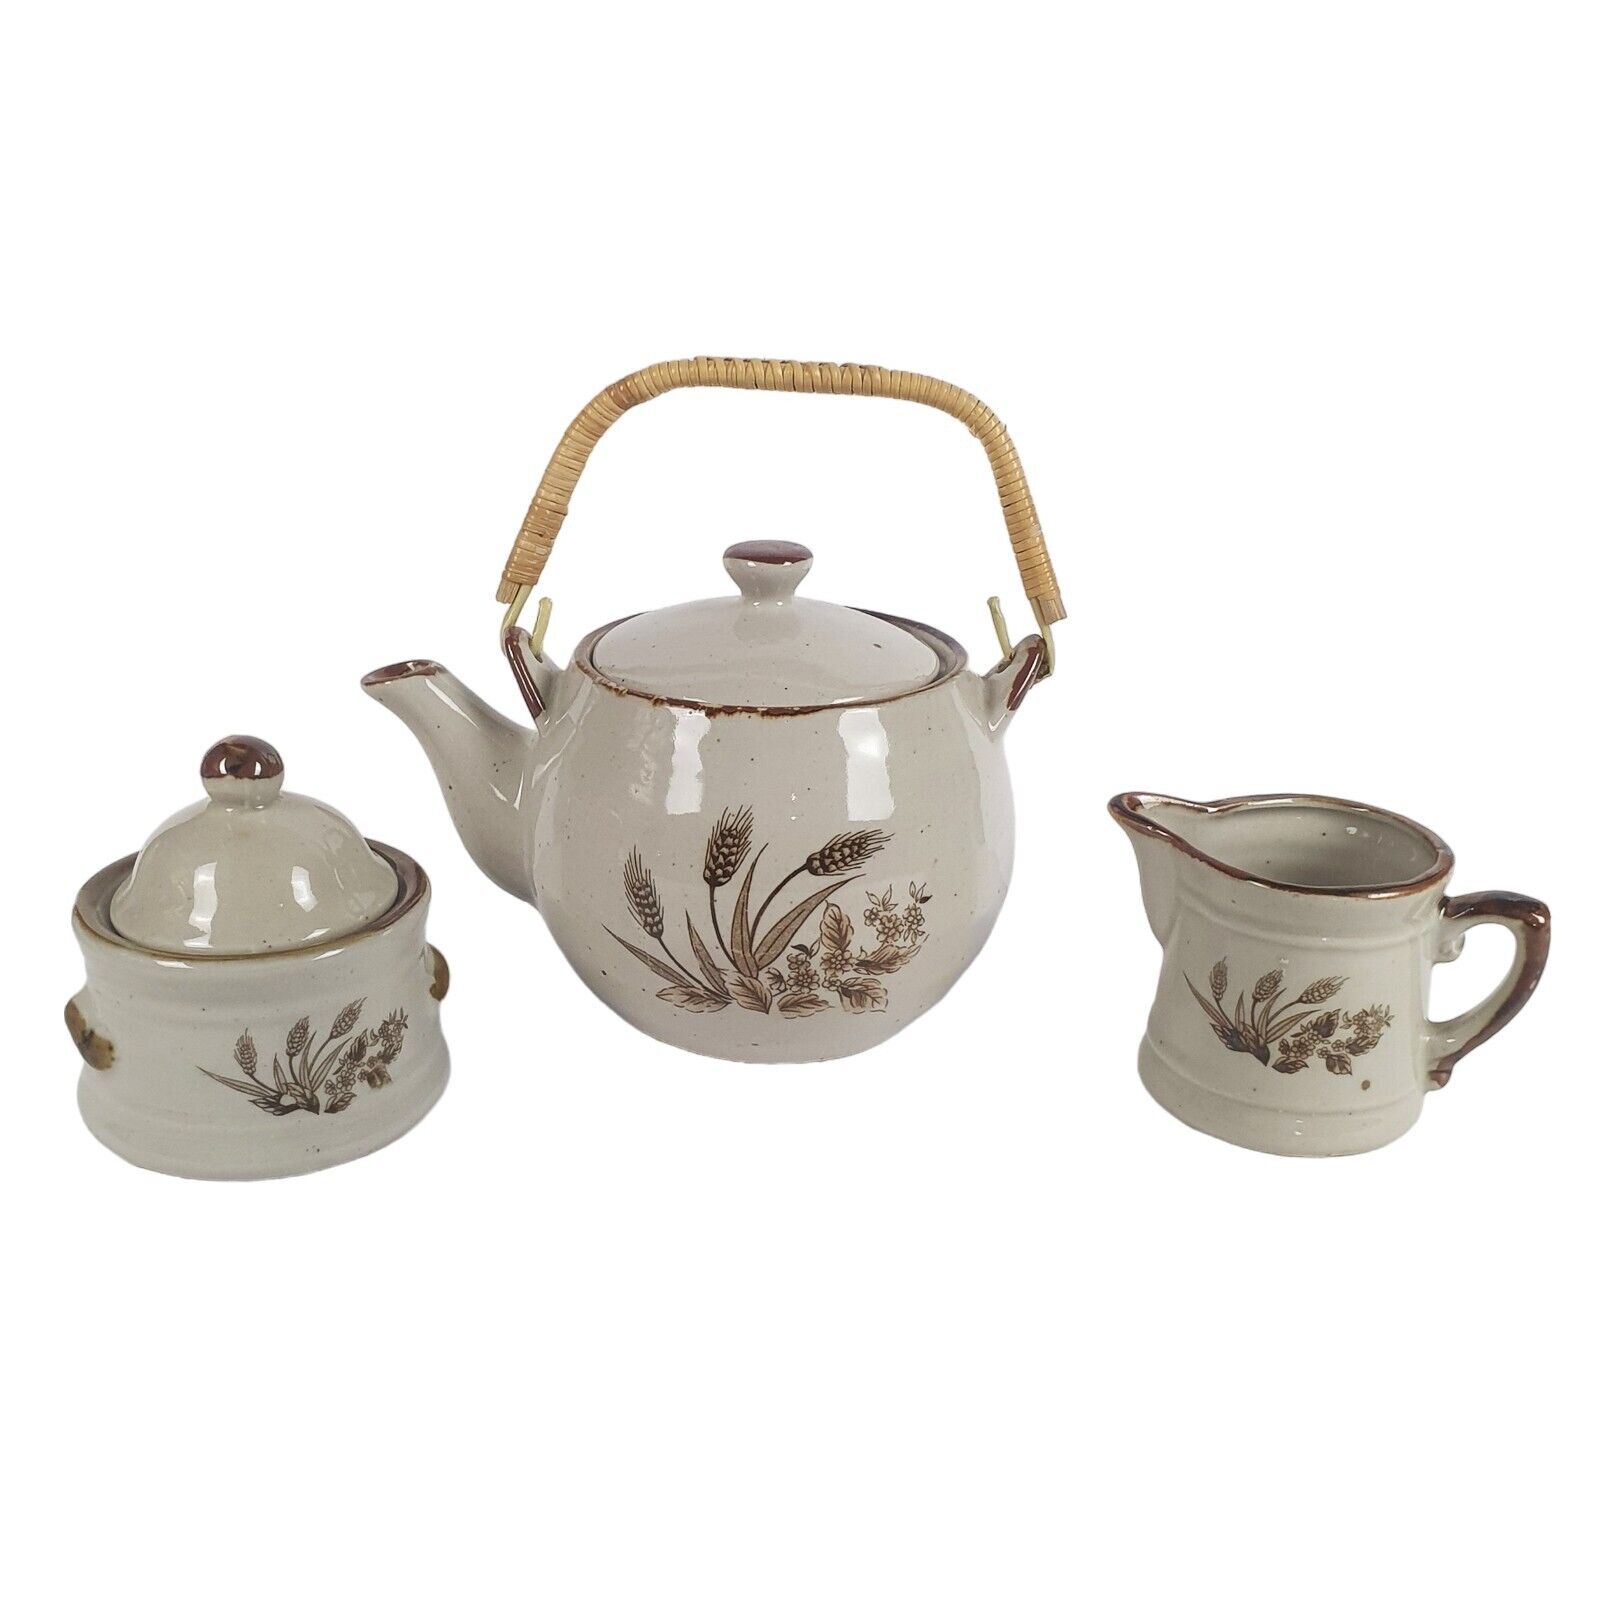 Vintage Teapot Set With Sugar Bowl and Creamer Pottery Wheat Design VGC